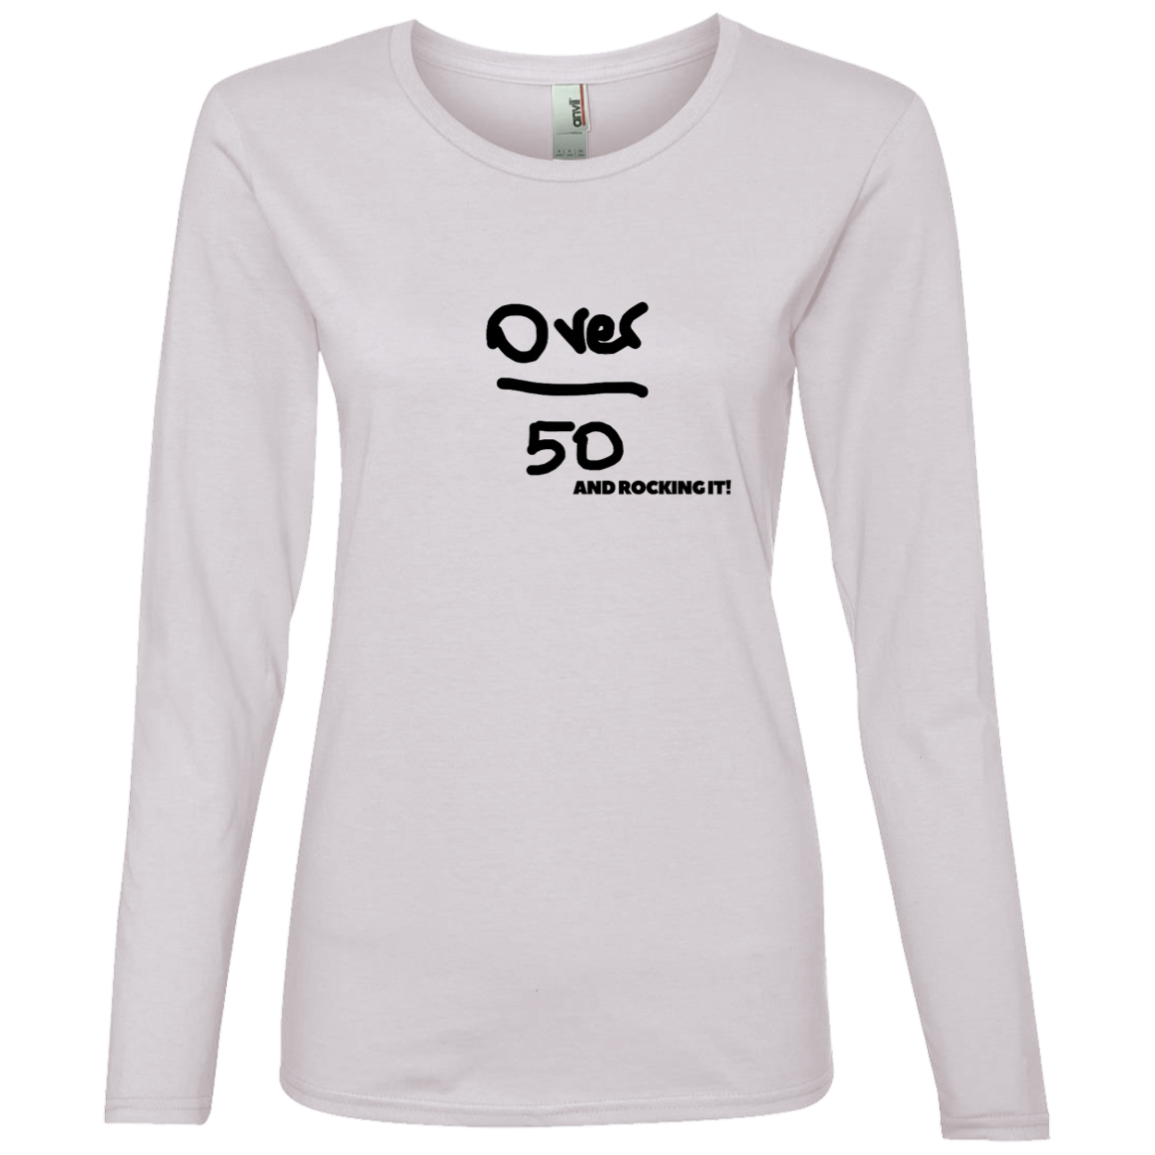 Over 50 and Rocking it - 884L Anvil Ladies' Lightweight LS T-Shirt